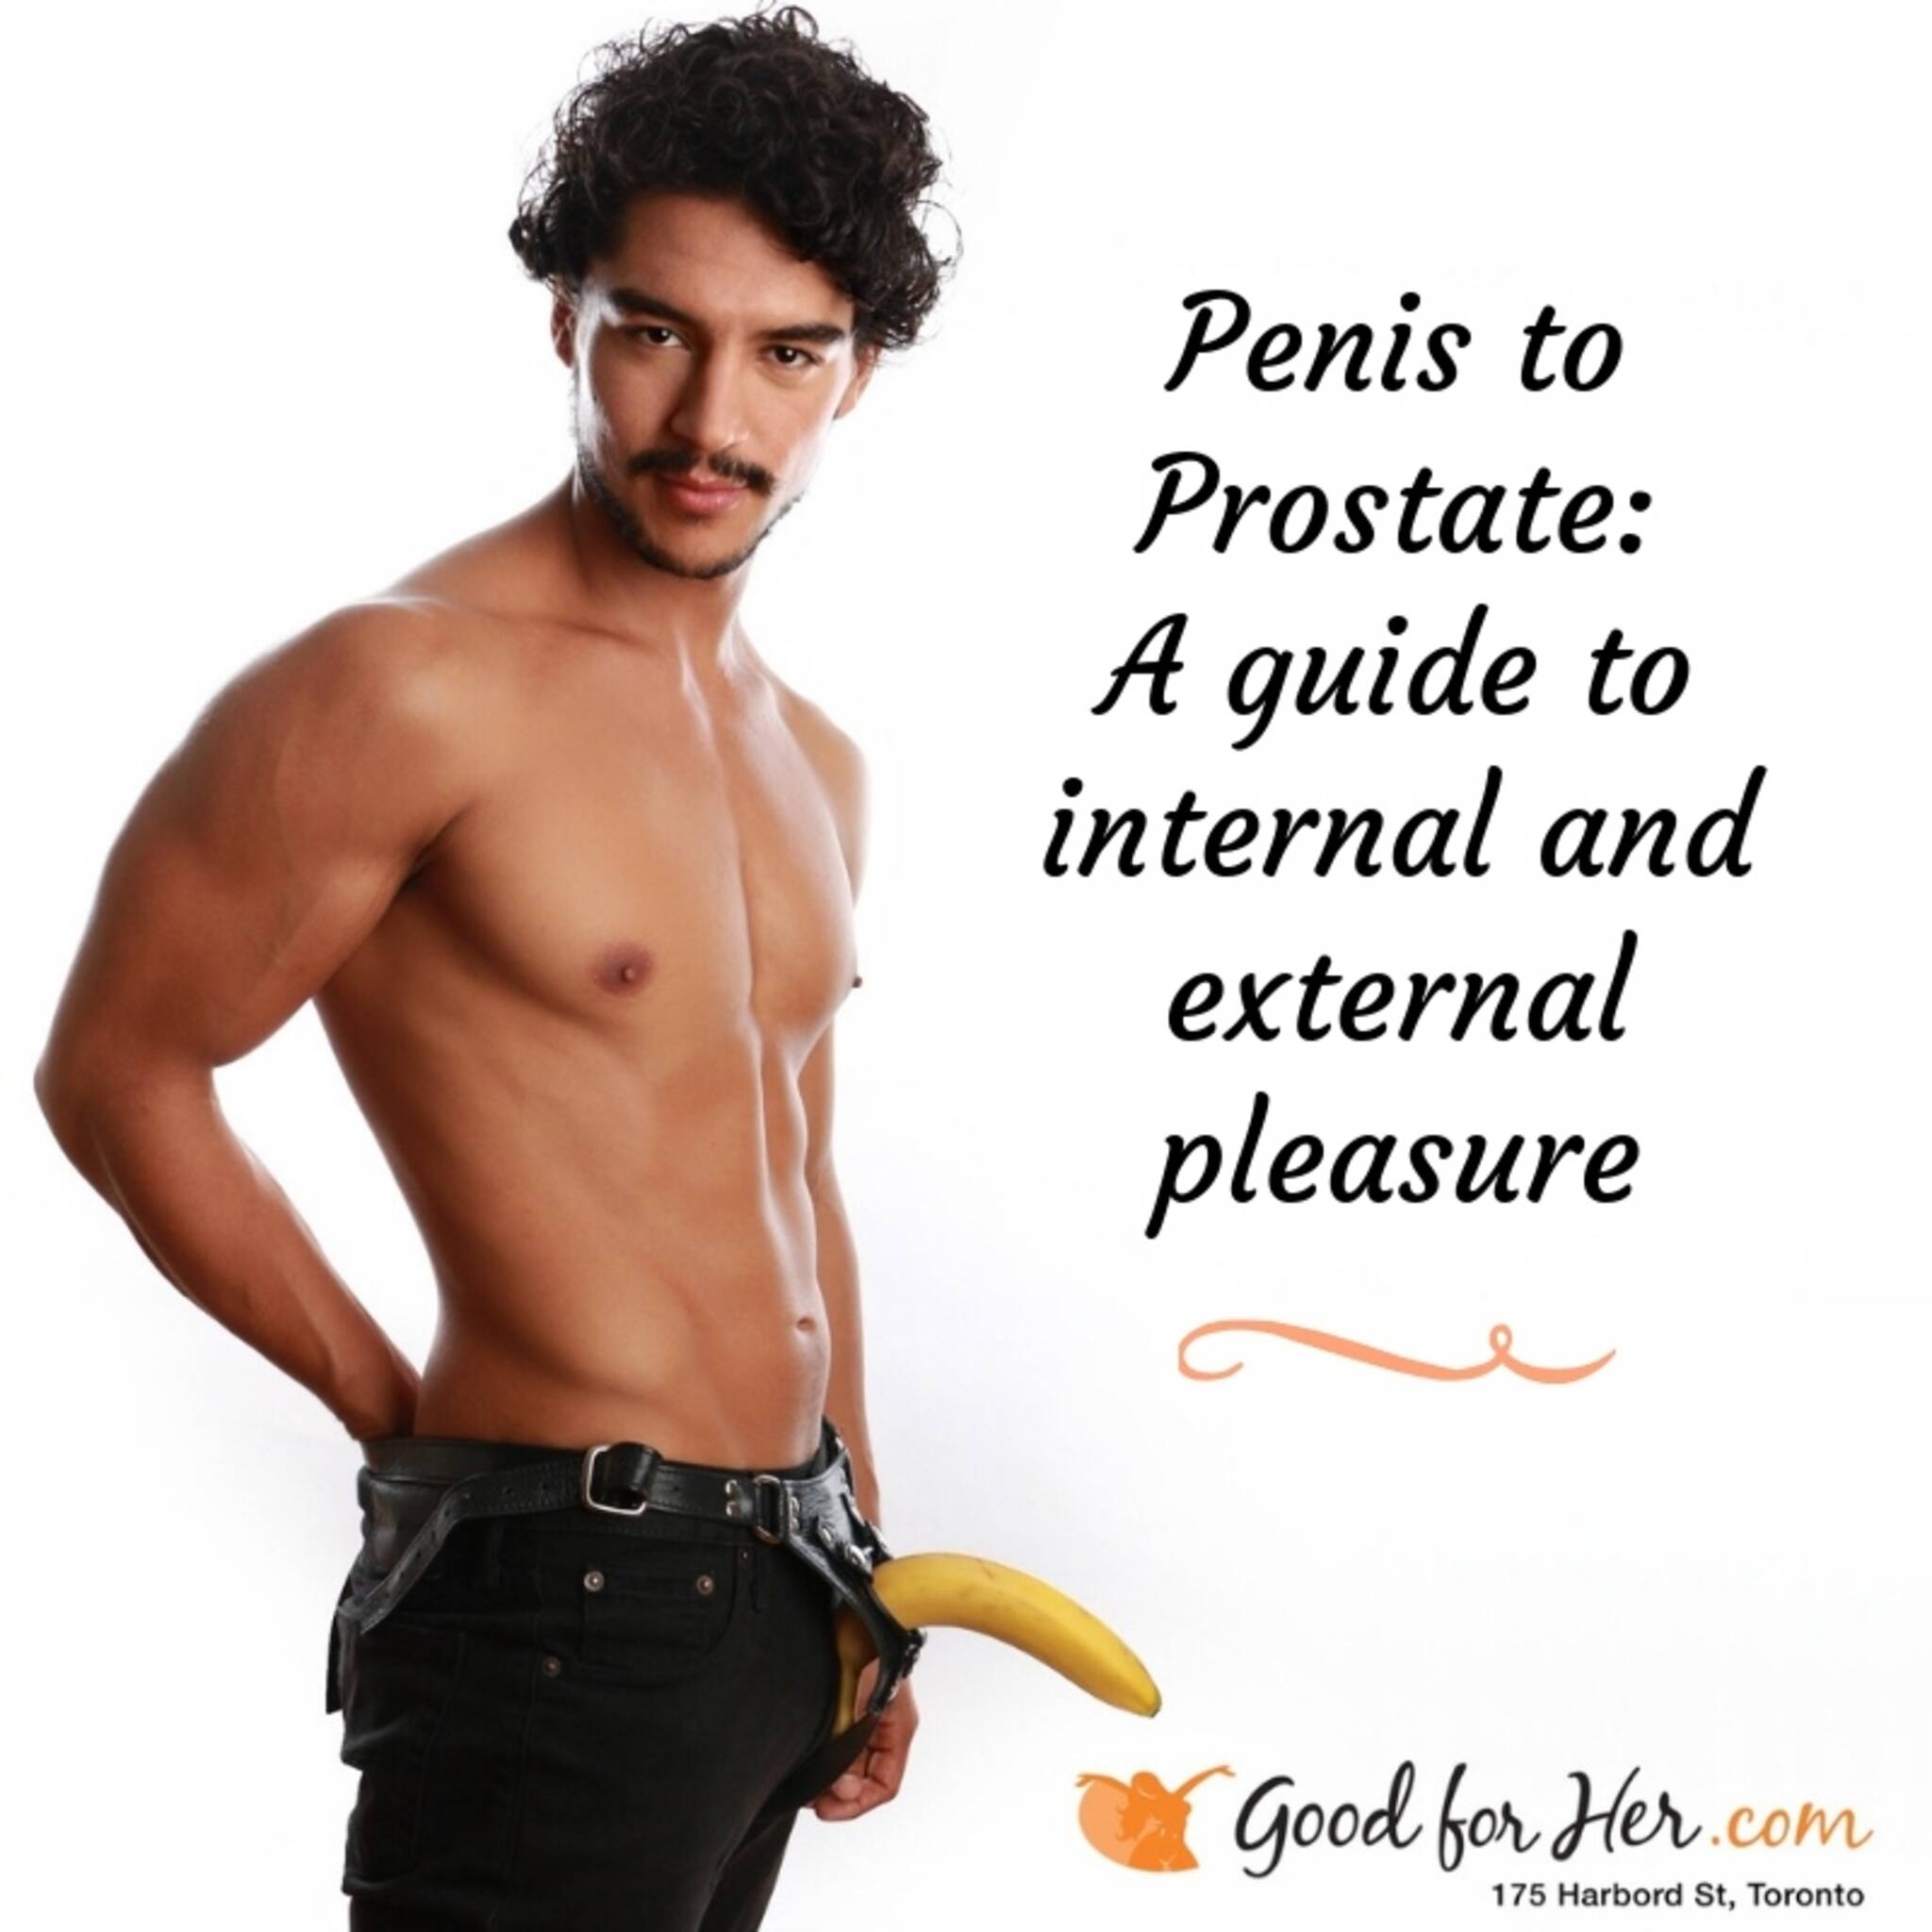 Penis to Prostate: A Guide to Internal and External Pleasure